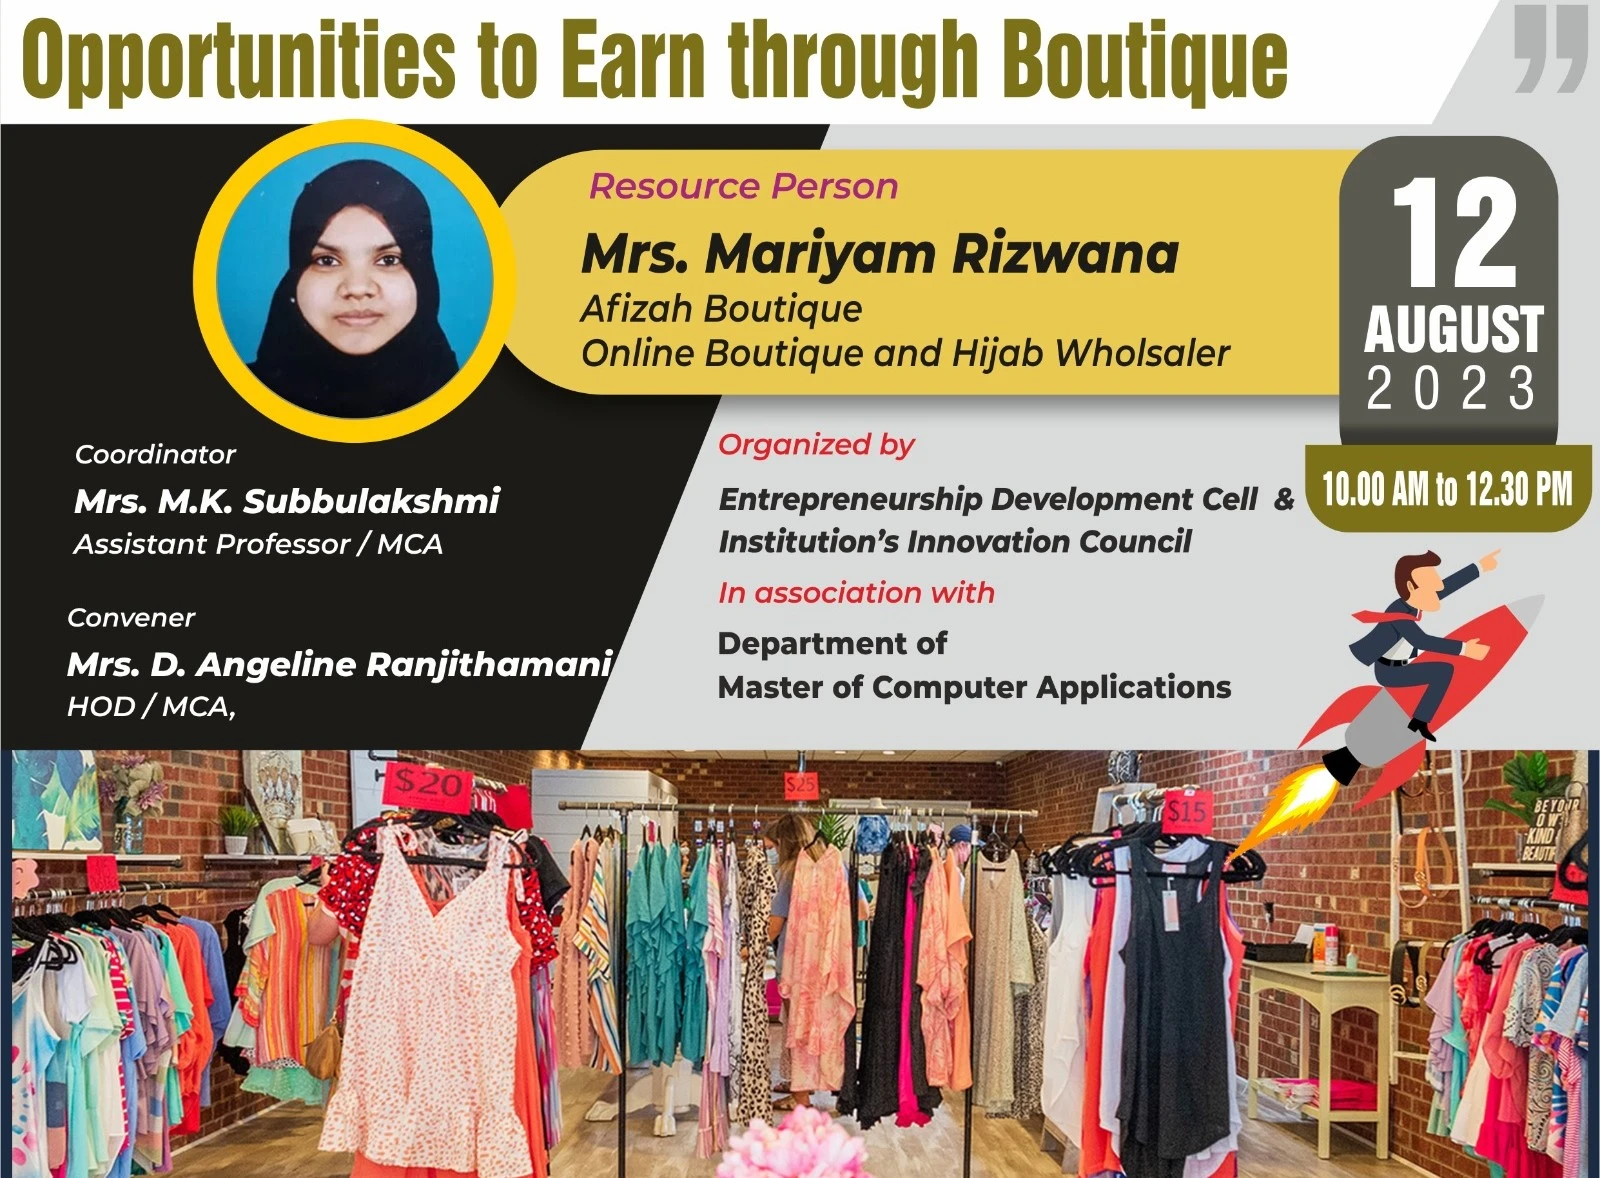 Opportunities To Earn through Boutique